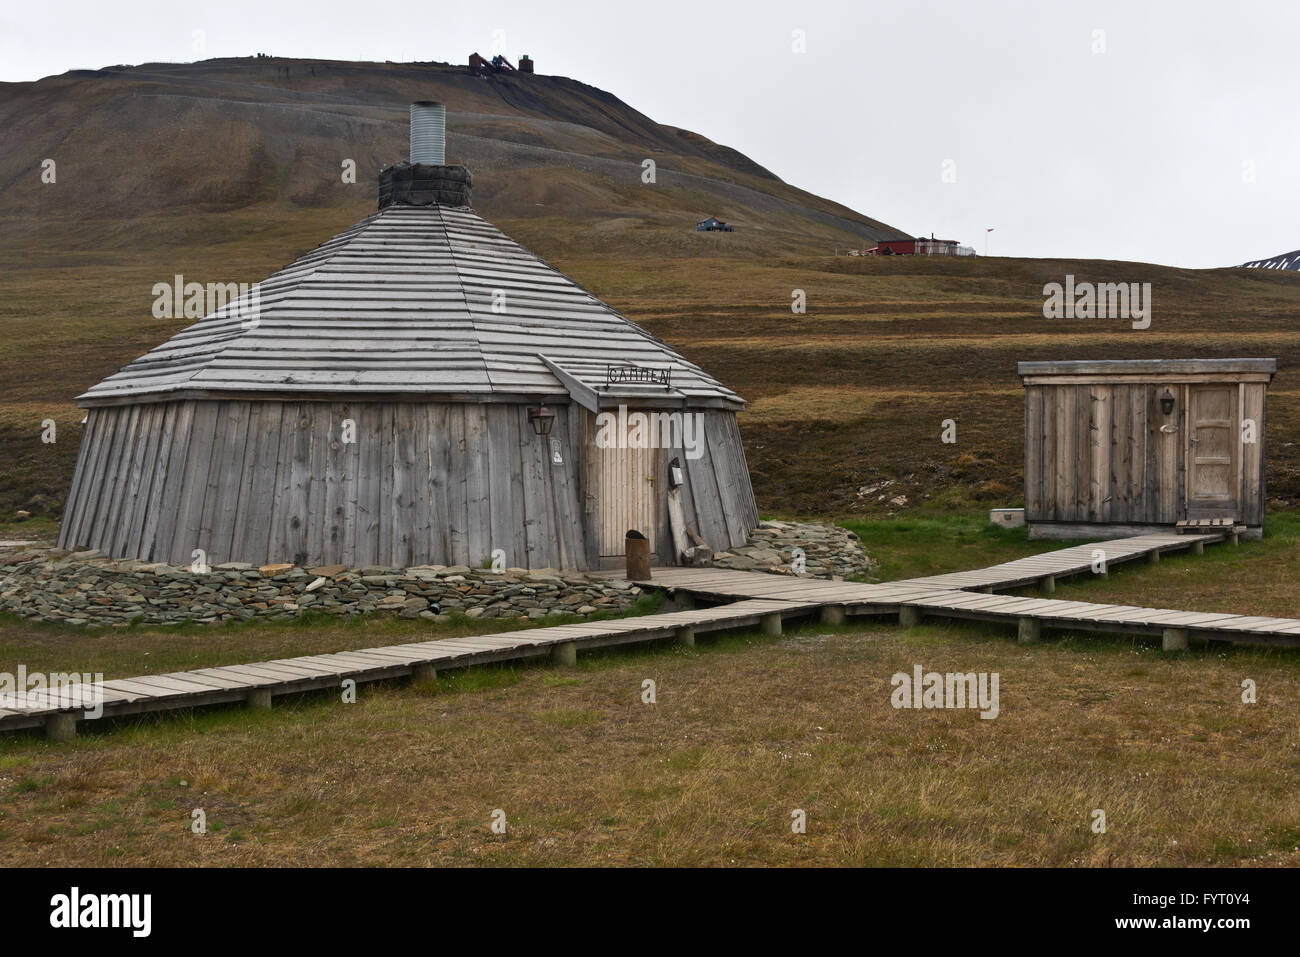 Wooden buildings at Camp Barentz just outside Longyearbyen in Svalbard Stock Photo